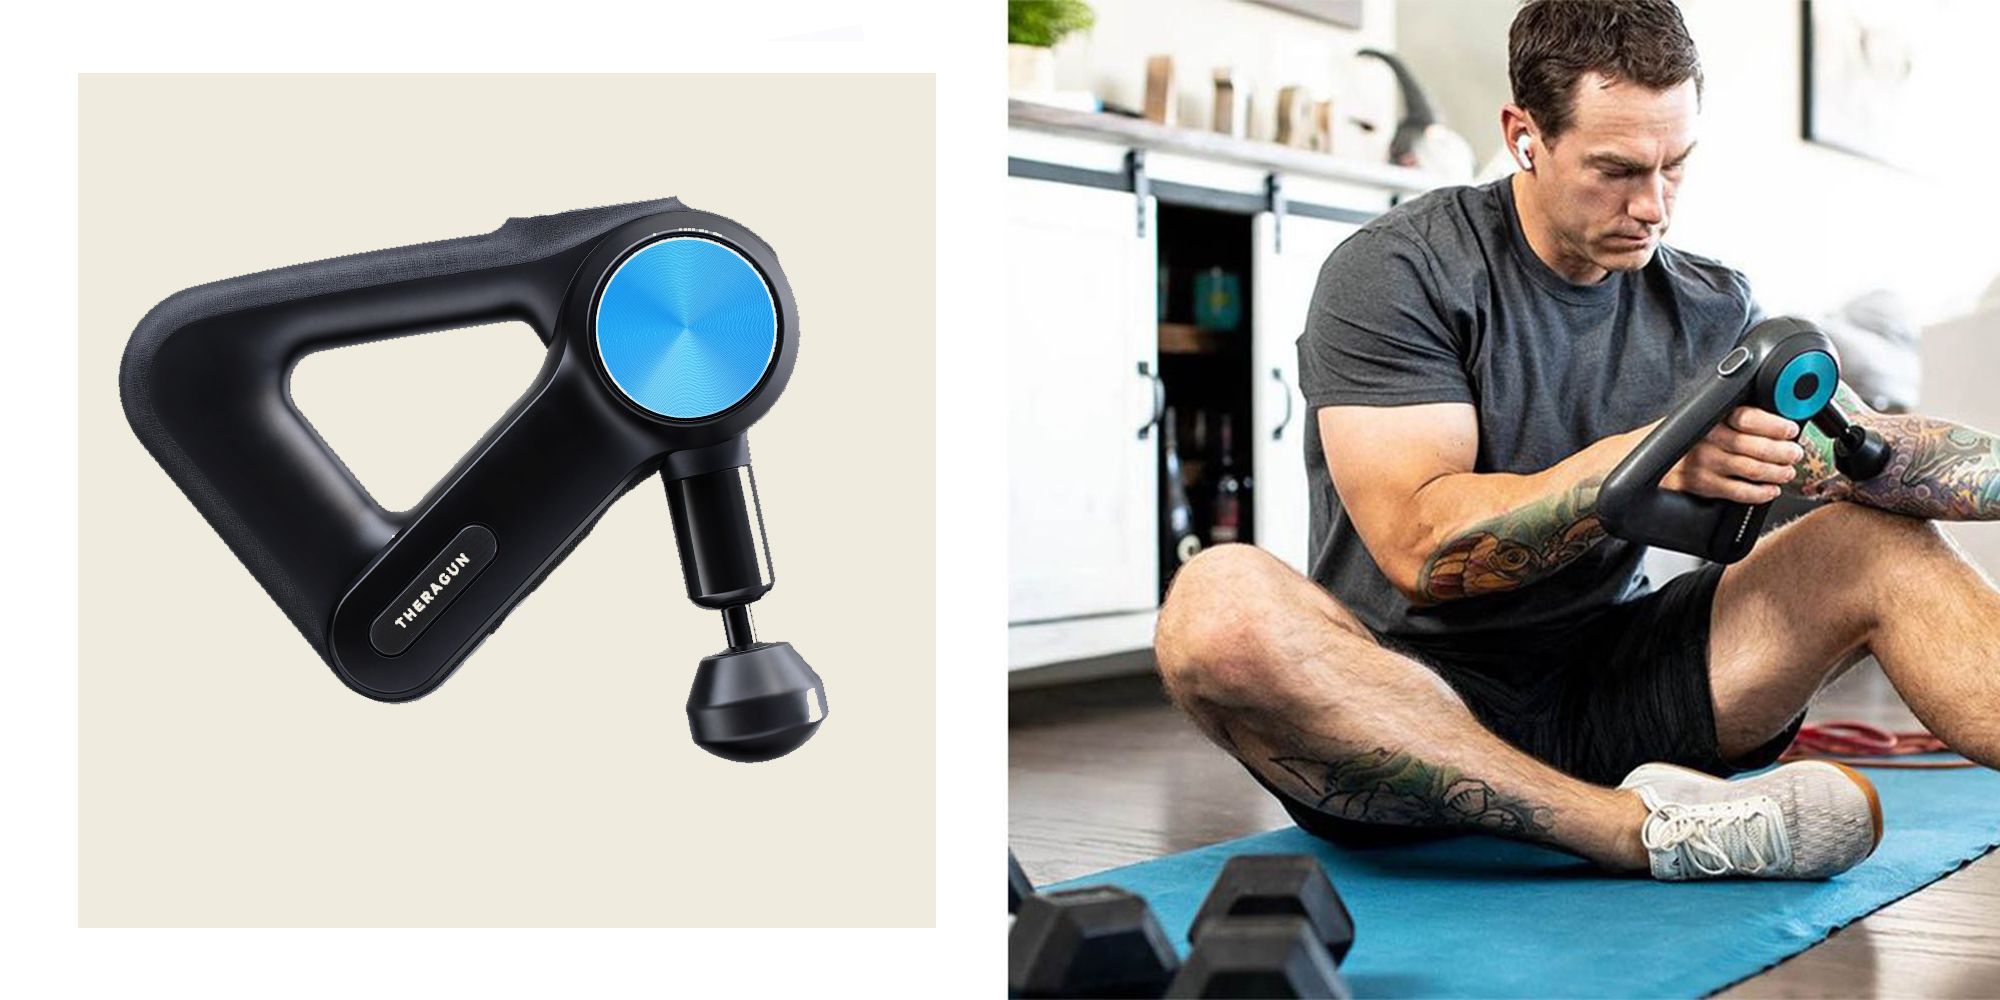 Massage Gun for Athletes,Cotsoco Deep Tissue Percussion Body Muscle Massager  with 30 Adjustable Speeds,10 Massage Heads,Handheld Deep Tissue Massager  for Neck Back Pain Relief (Black) 